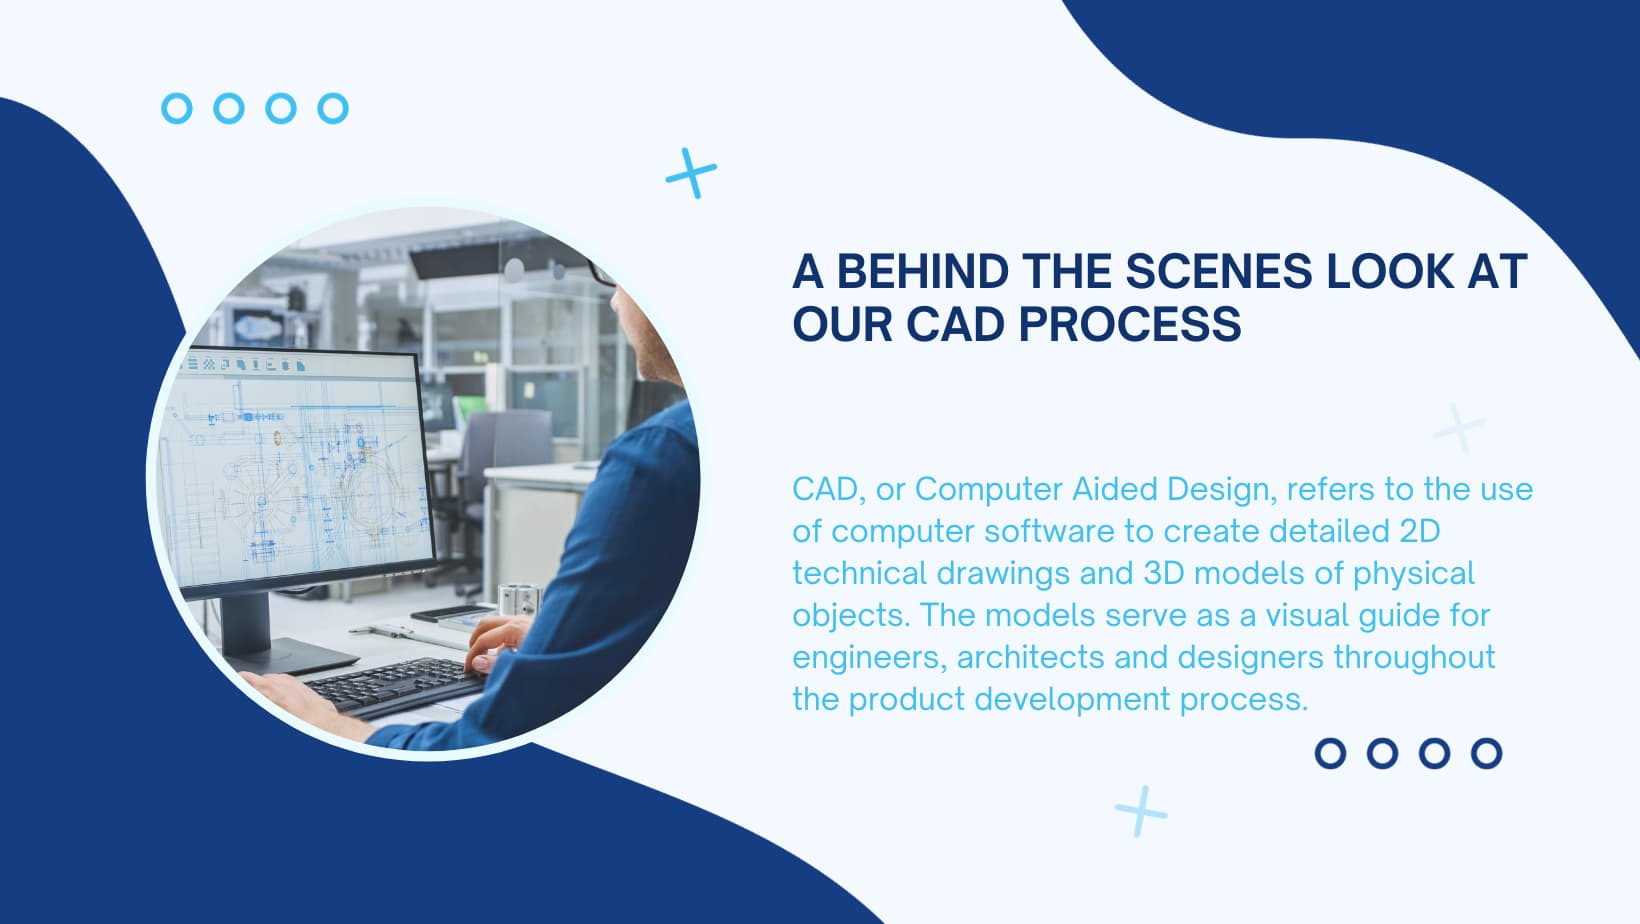 Behind the scenes look at our cad process.